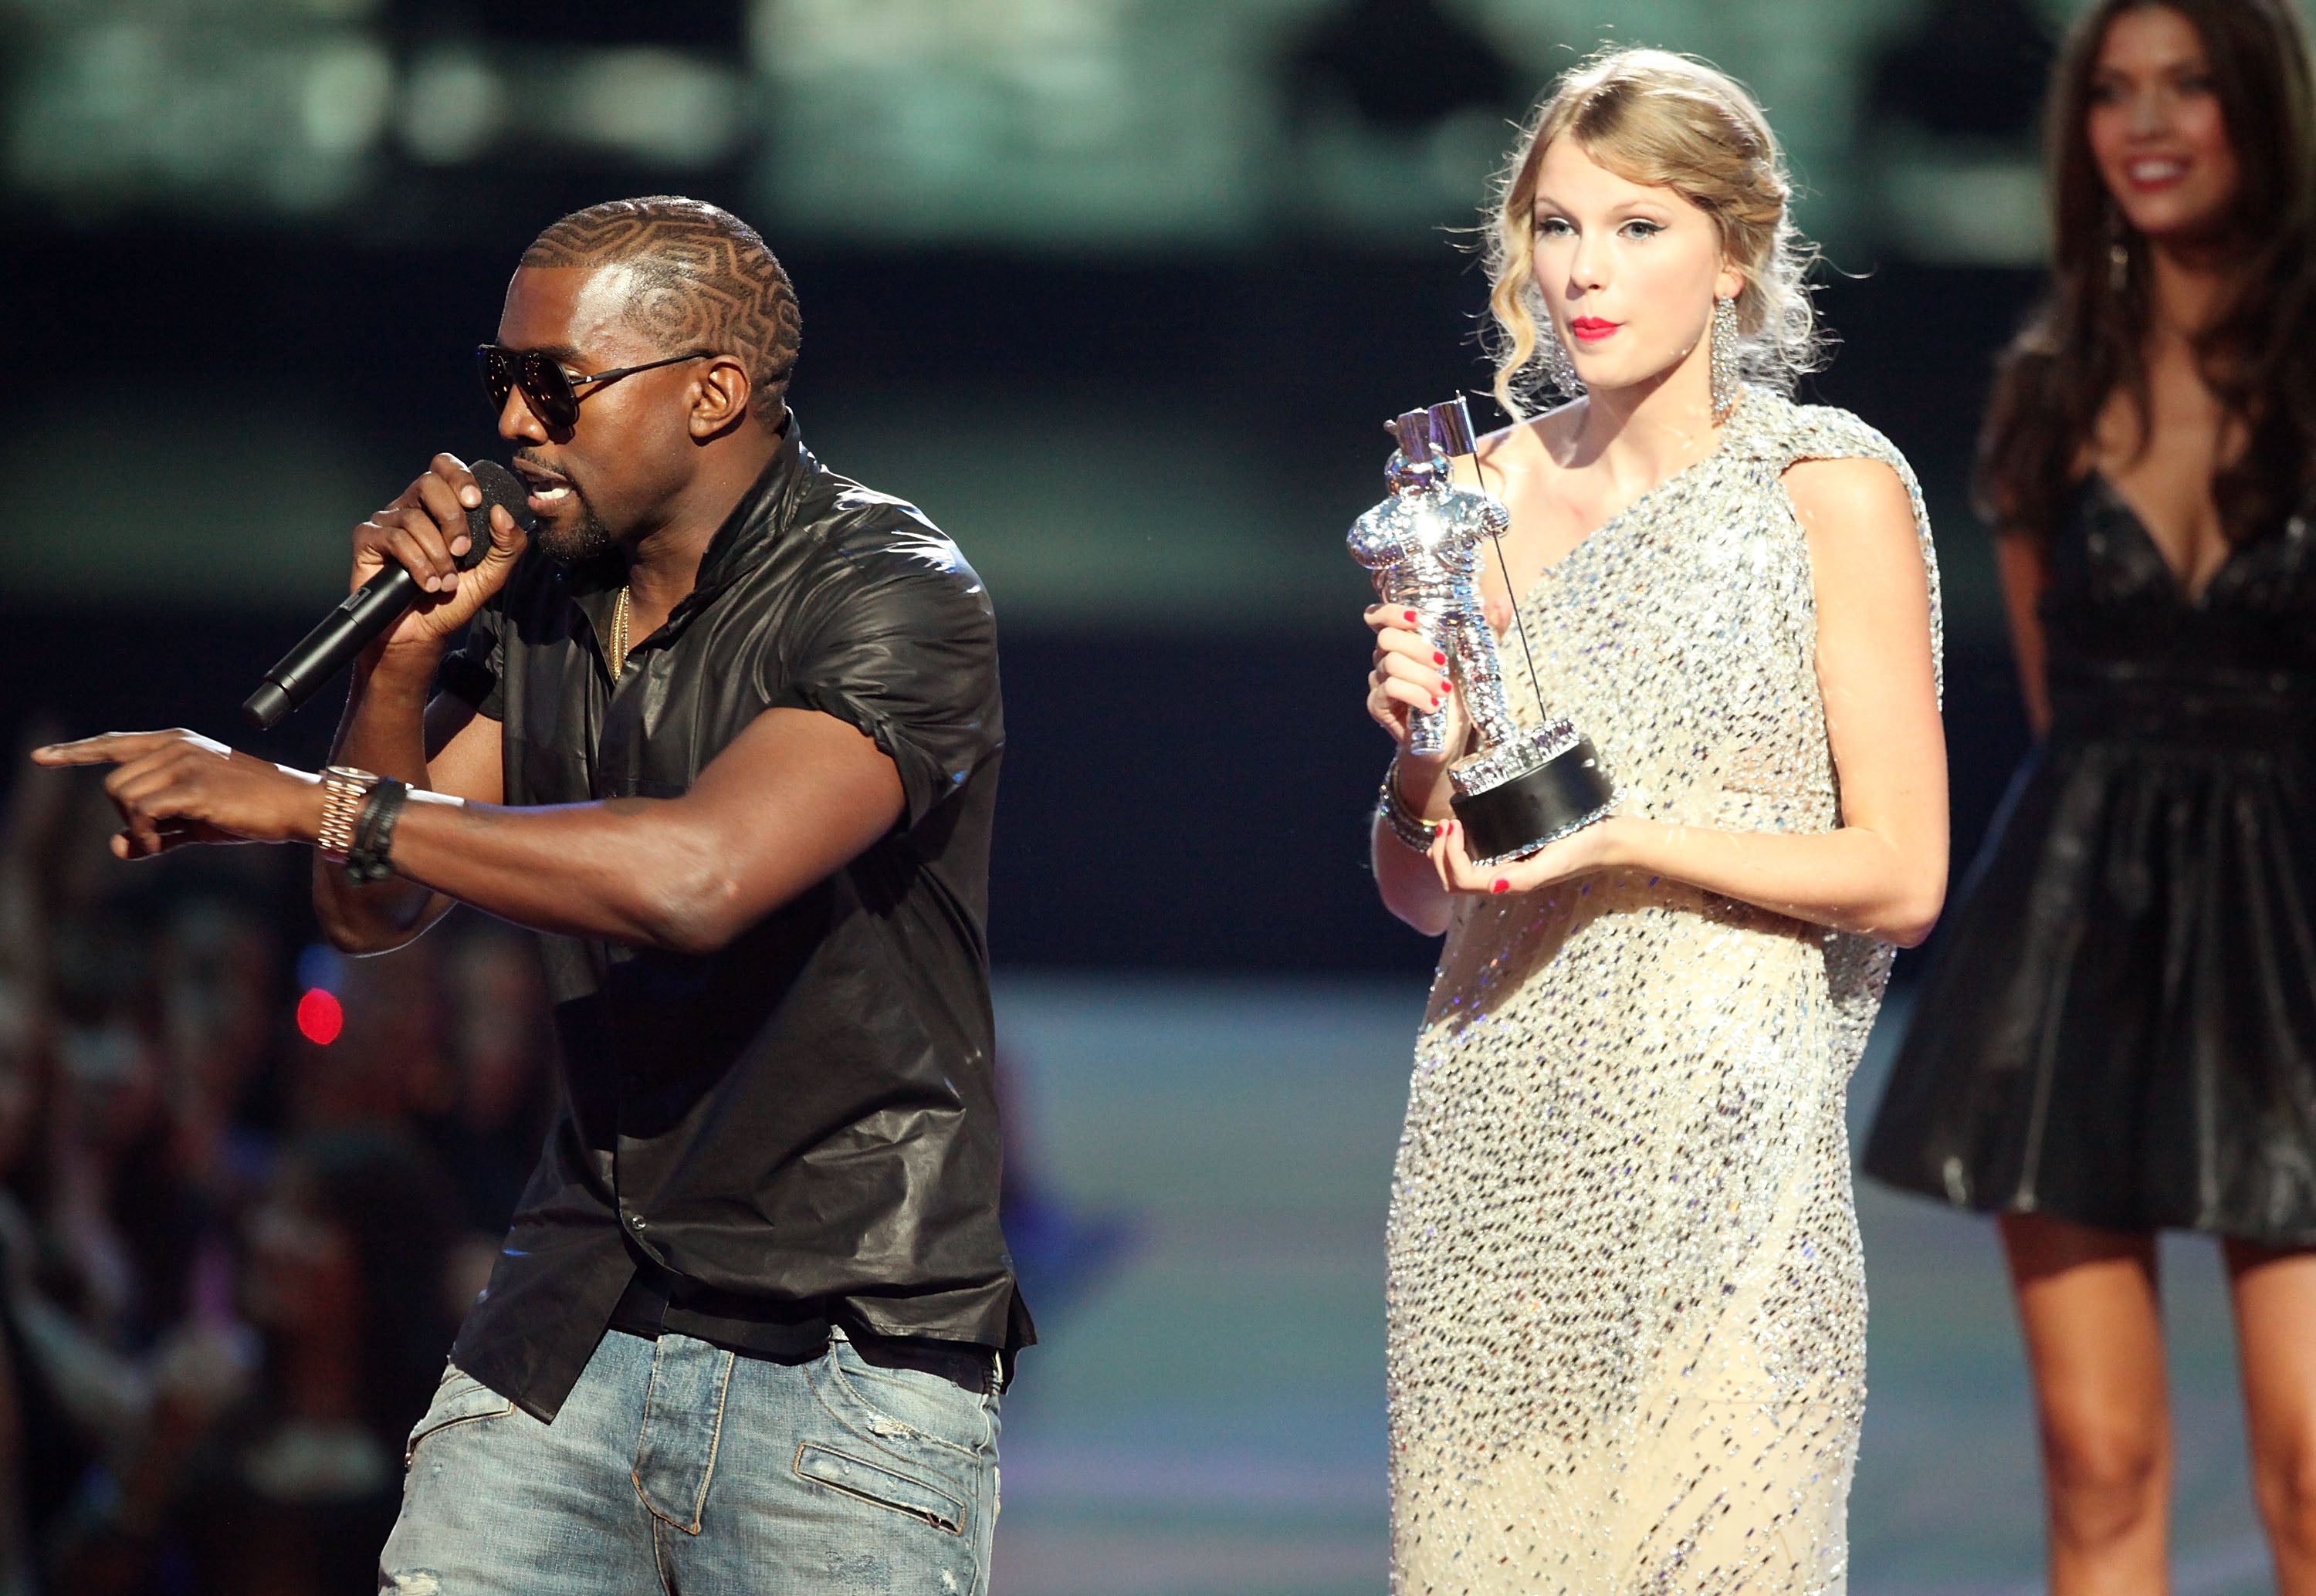 ‘Imma let you finish’ The 10 most moments in MTV VMA history